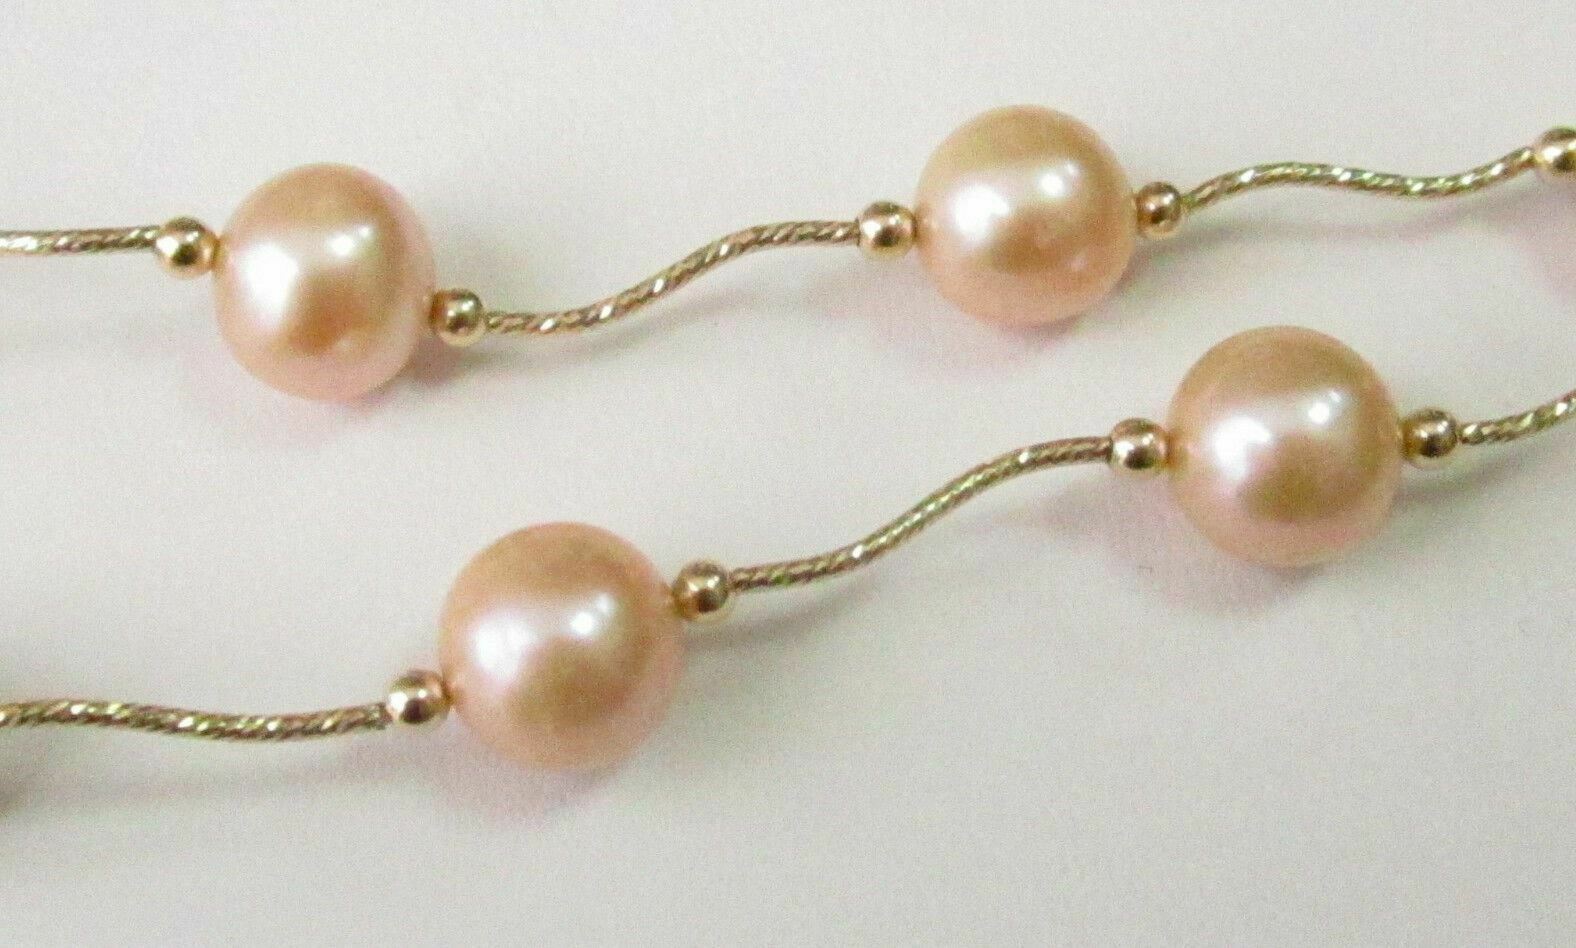 Light Gold/Peach Pearl String Necklace 11mm 18k Yellow Gold 17 Inches Long